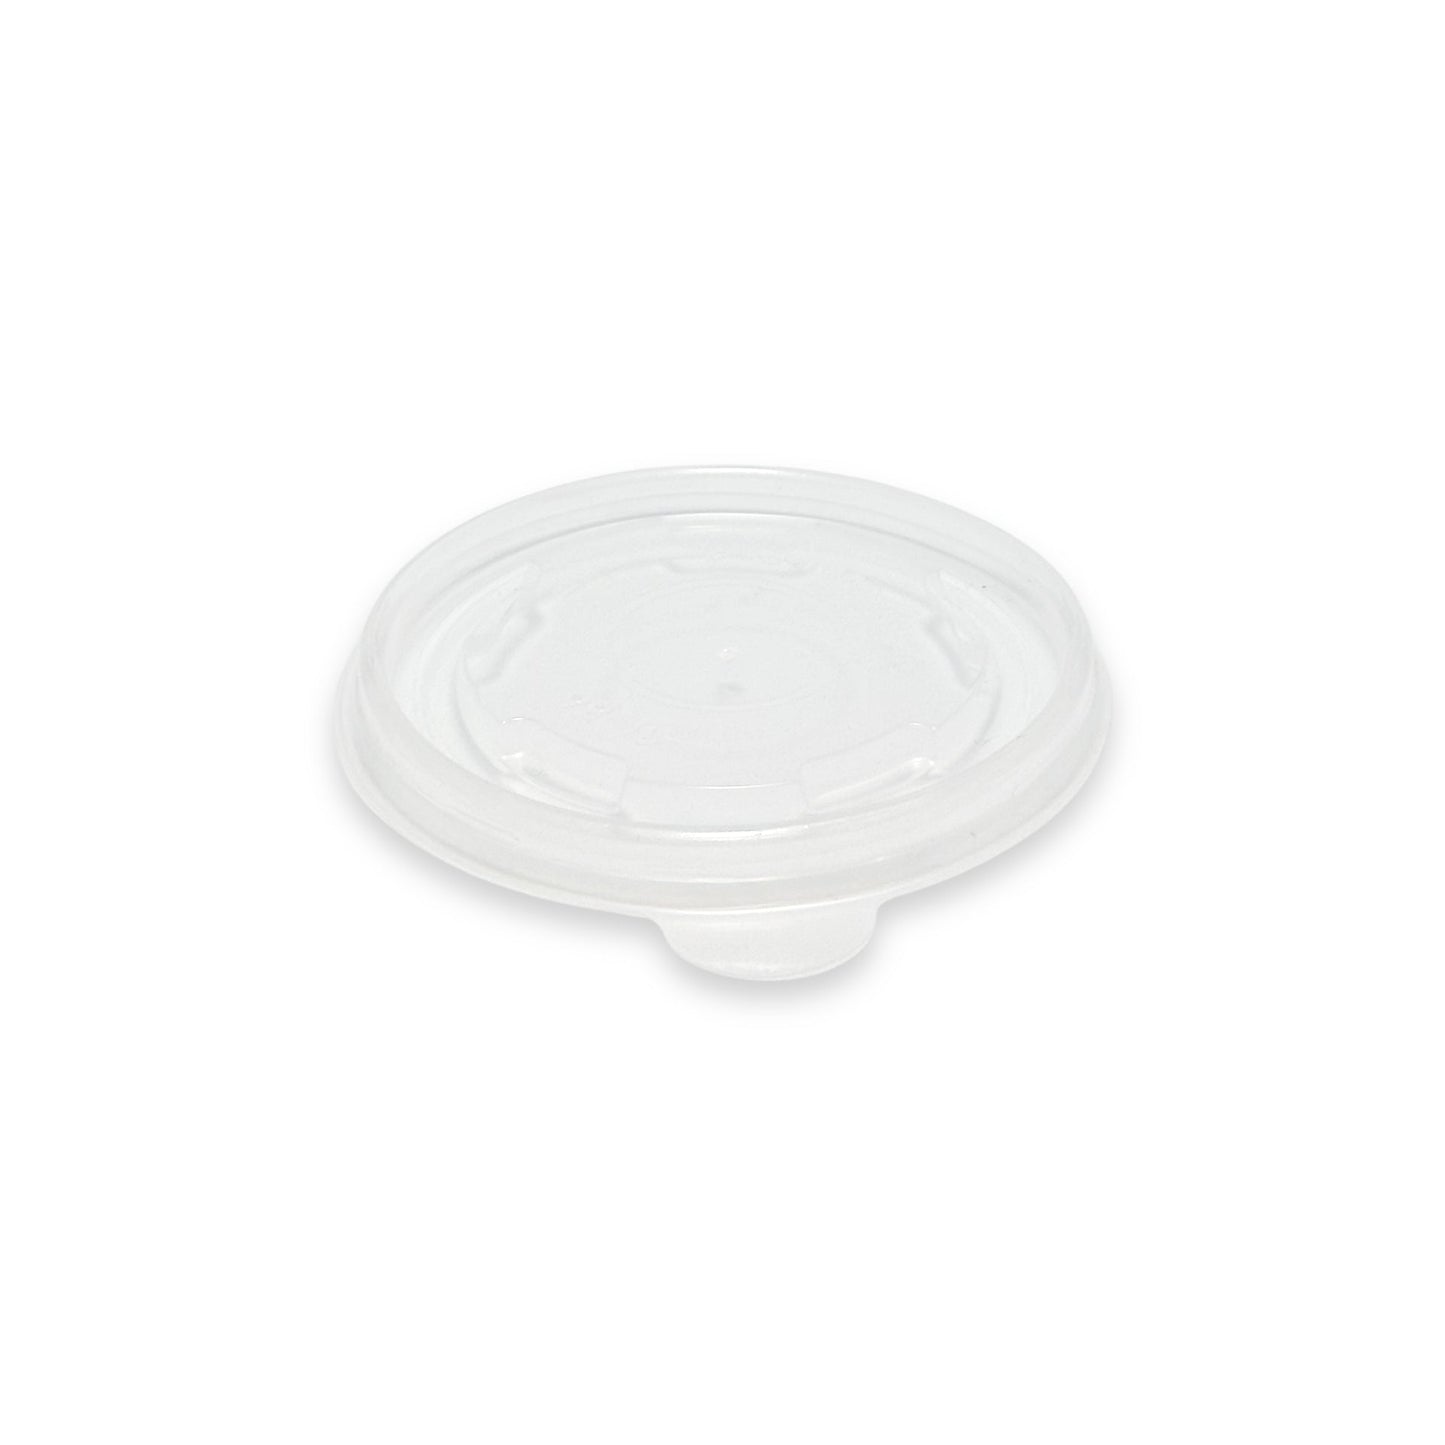 KIS-SL86G | 86mm PP Lid for 5oz Paper Soup Container; From $0.028/pc